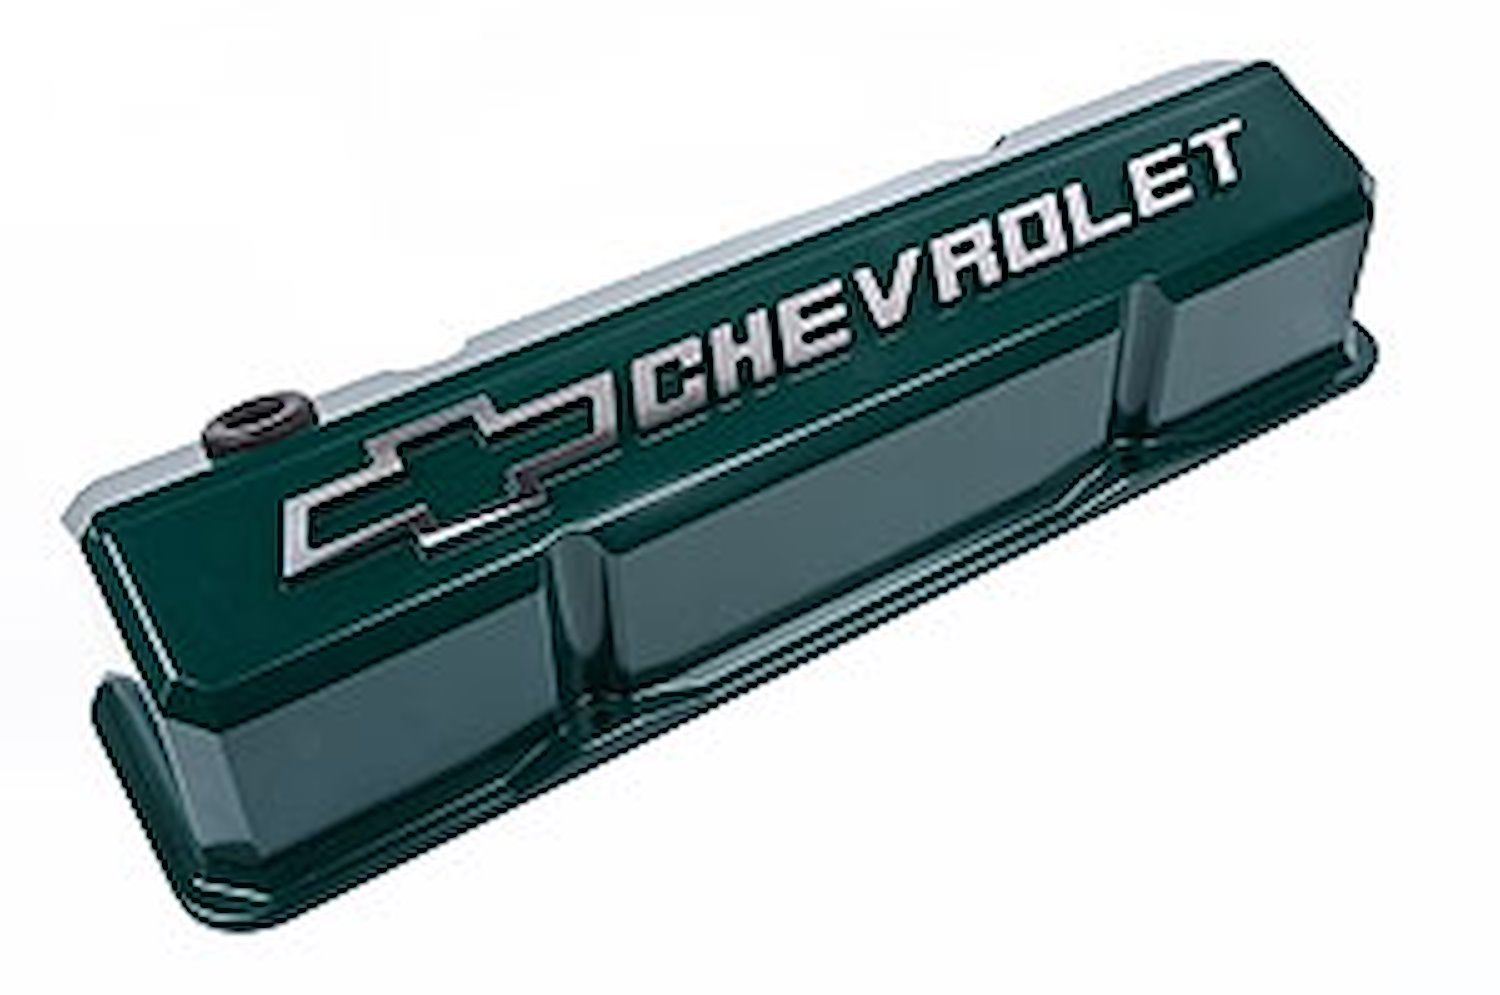 Die-Cast Slant-Edge Valve Covers for 1958-1986 Small Block Chevy with Chevrolet/Bowtie Raised Emblem in Green Finish